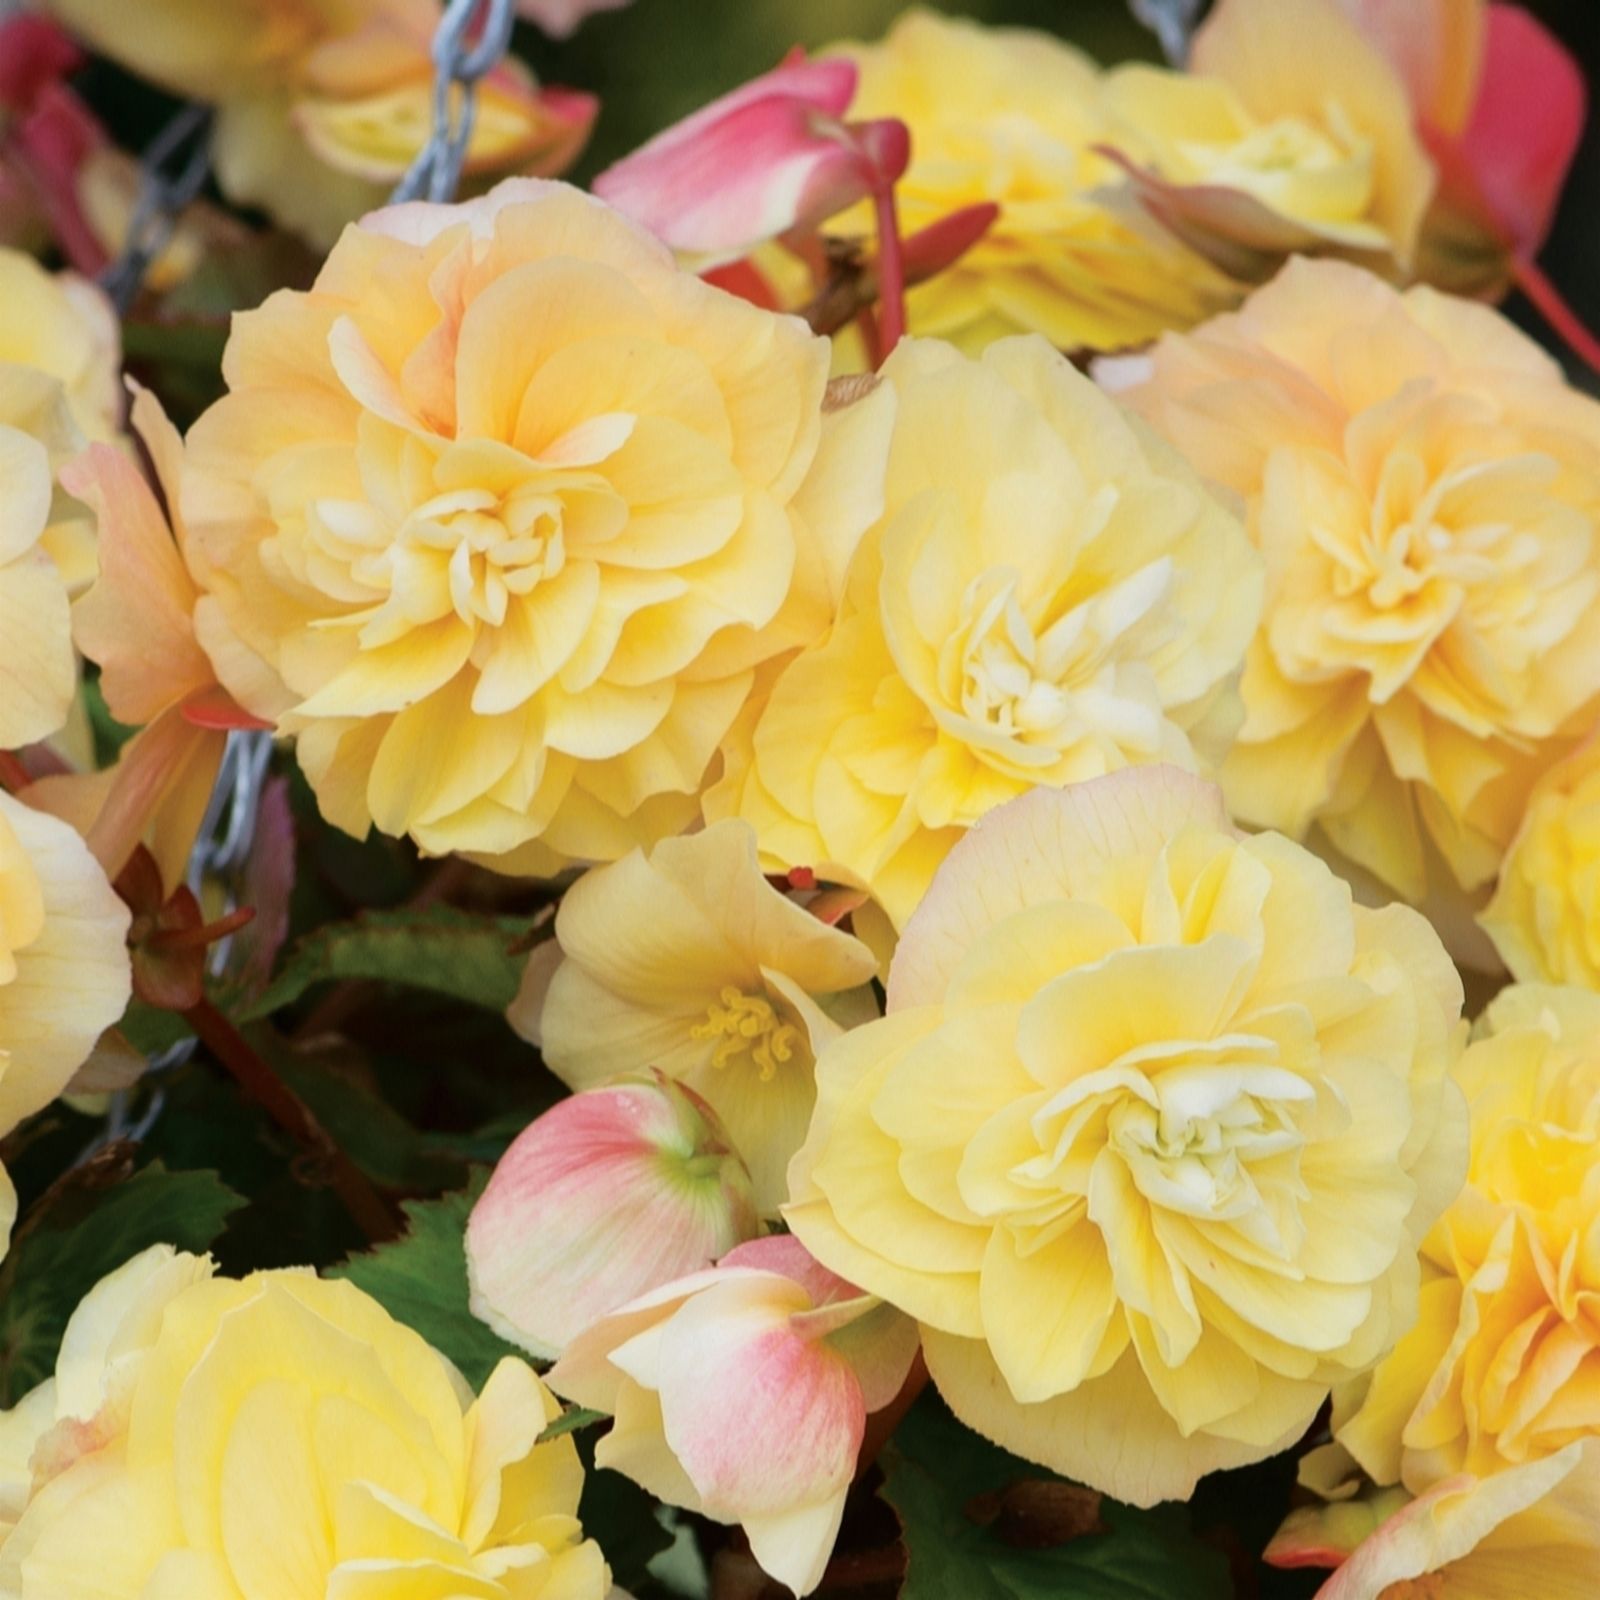 de Jager 6x Highly Scented Kerley Begonias  Young Plants - QVC UK